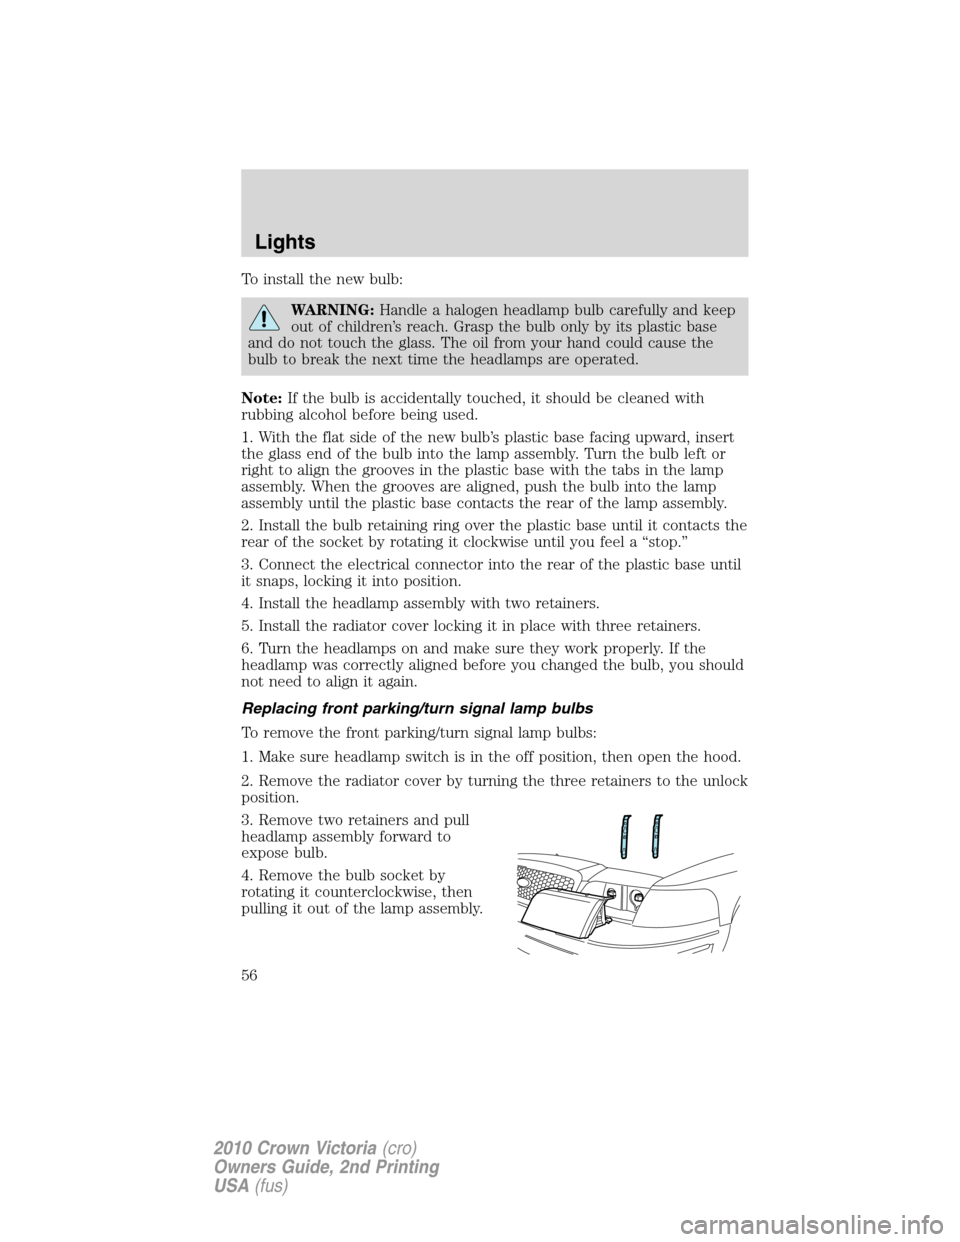 FORD CROWN VICTORIA 2010 2.G Owners Manual To install the new bulb:
WARNING:Handle a halogen headlamp bulb carefully and keep
out of children’s reach. Grasp the bulb only by its plastic base
and do not touch the glass. The oil from your hand